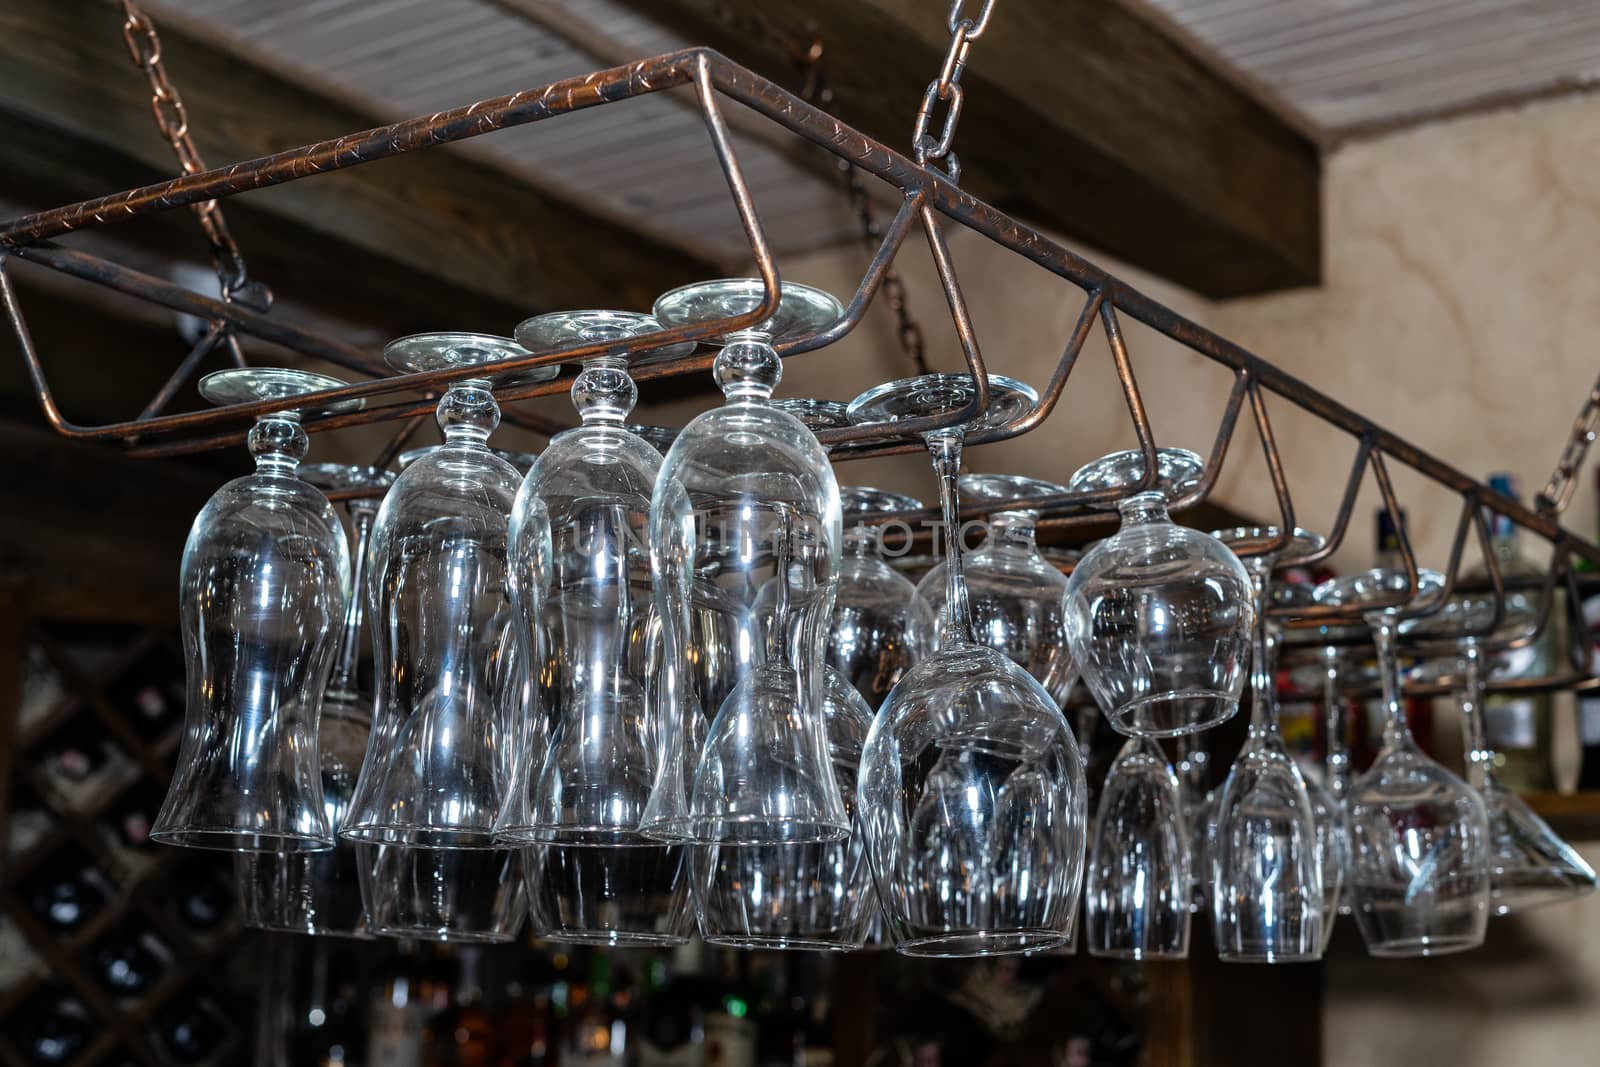 Many glass goblets hang over the bar. Empty glasses